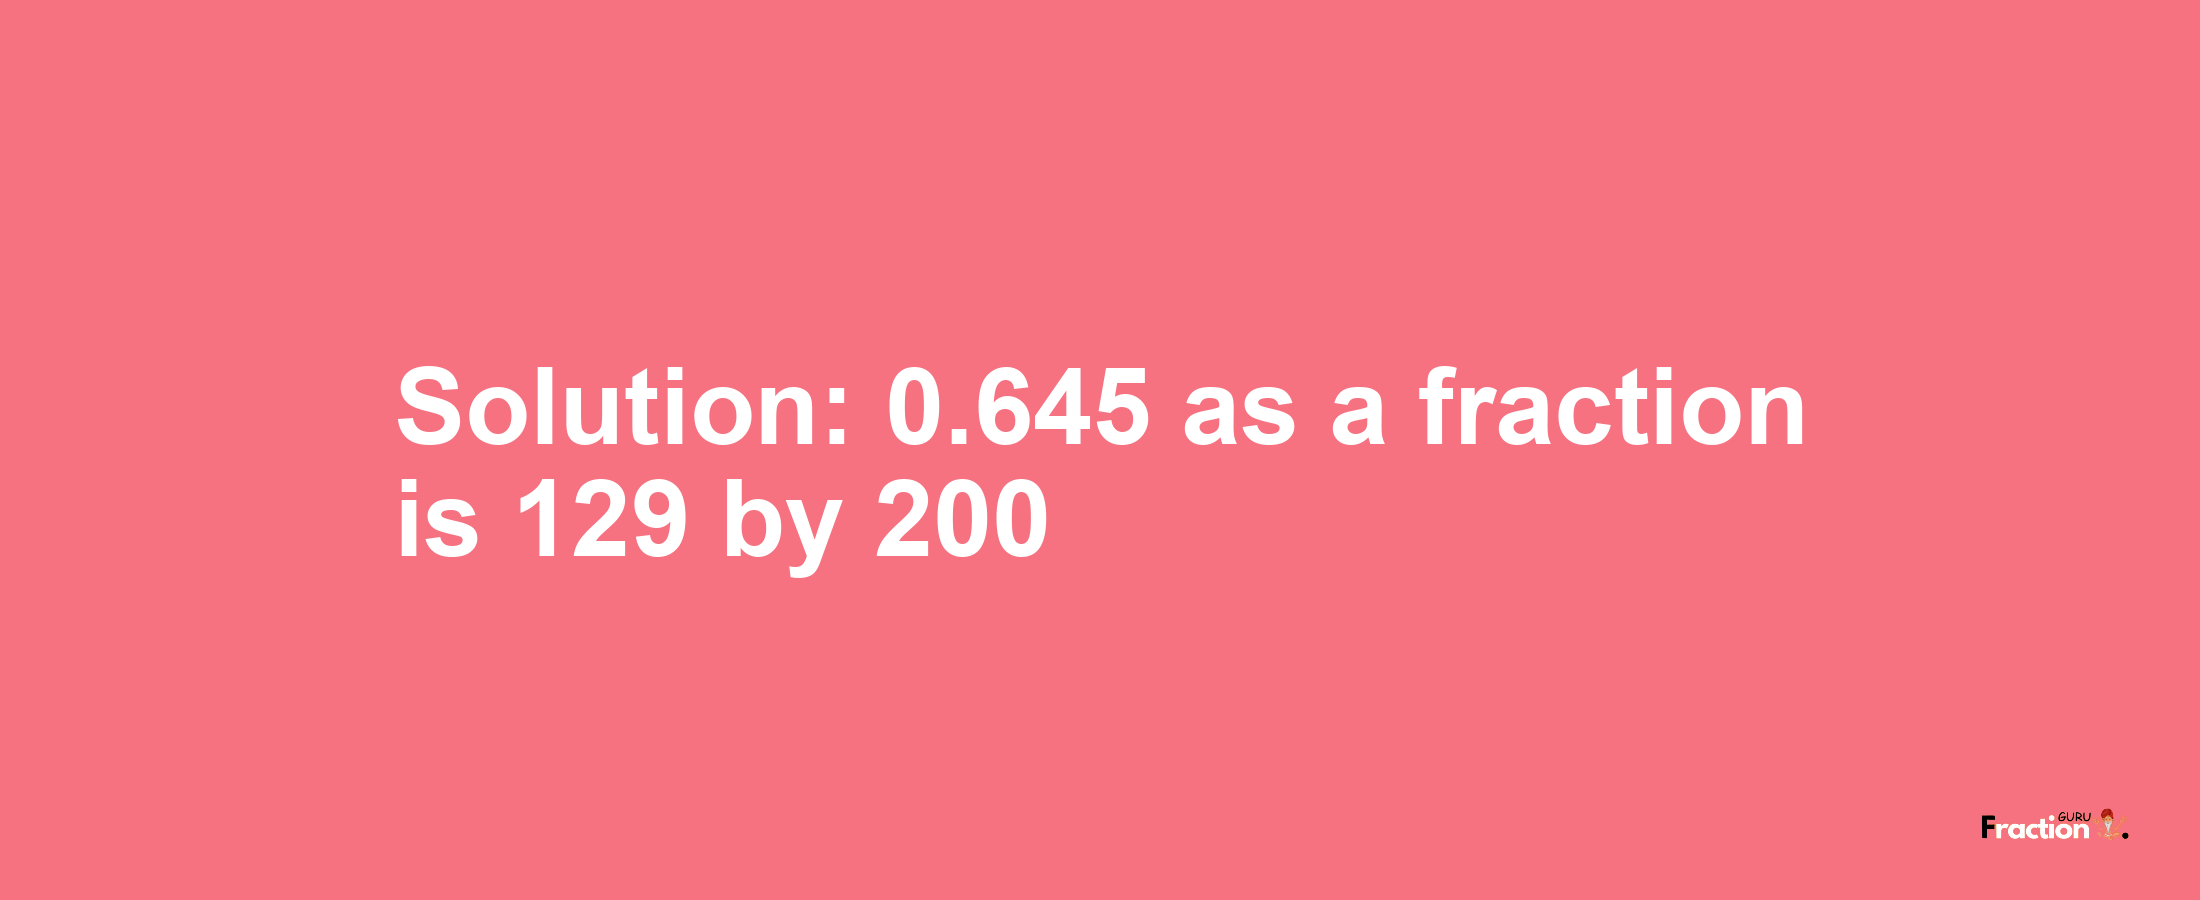 Solution:0.645 as a fraction is 129/200